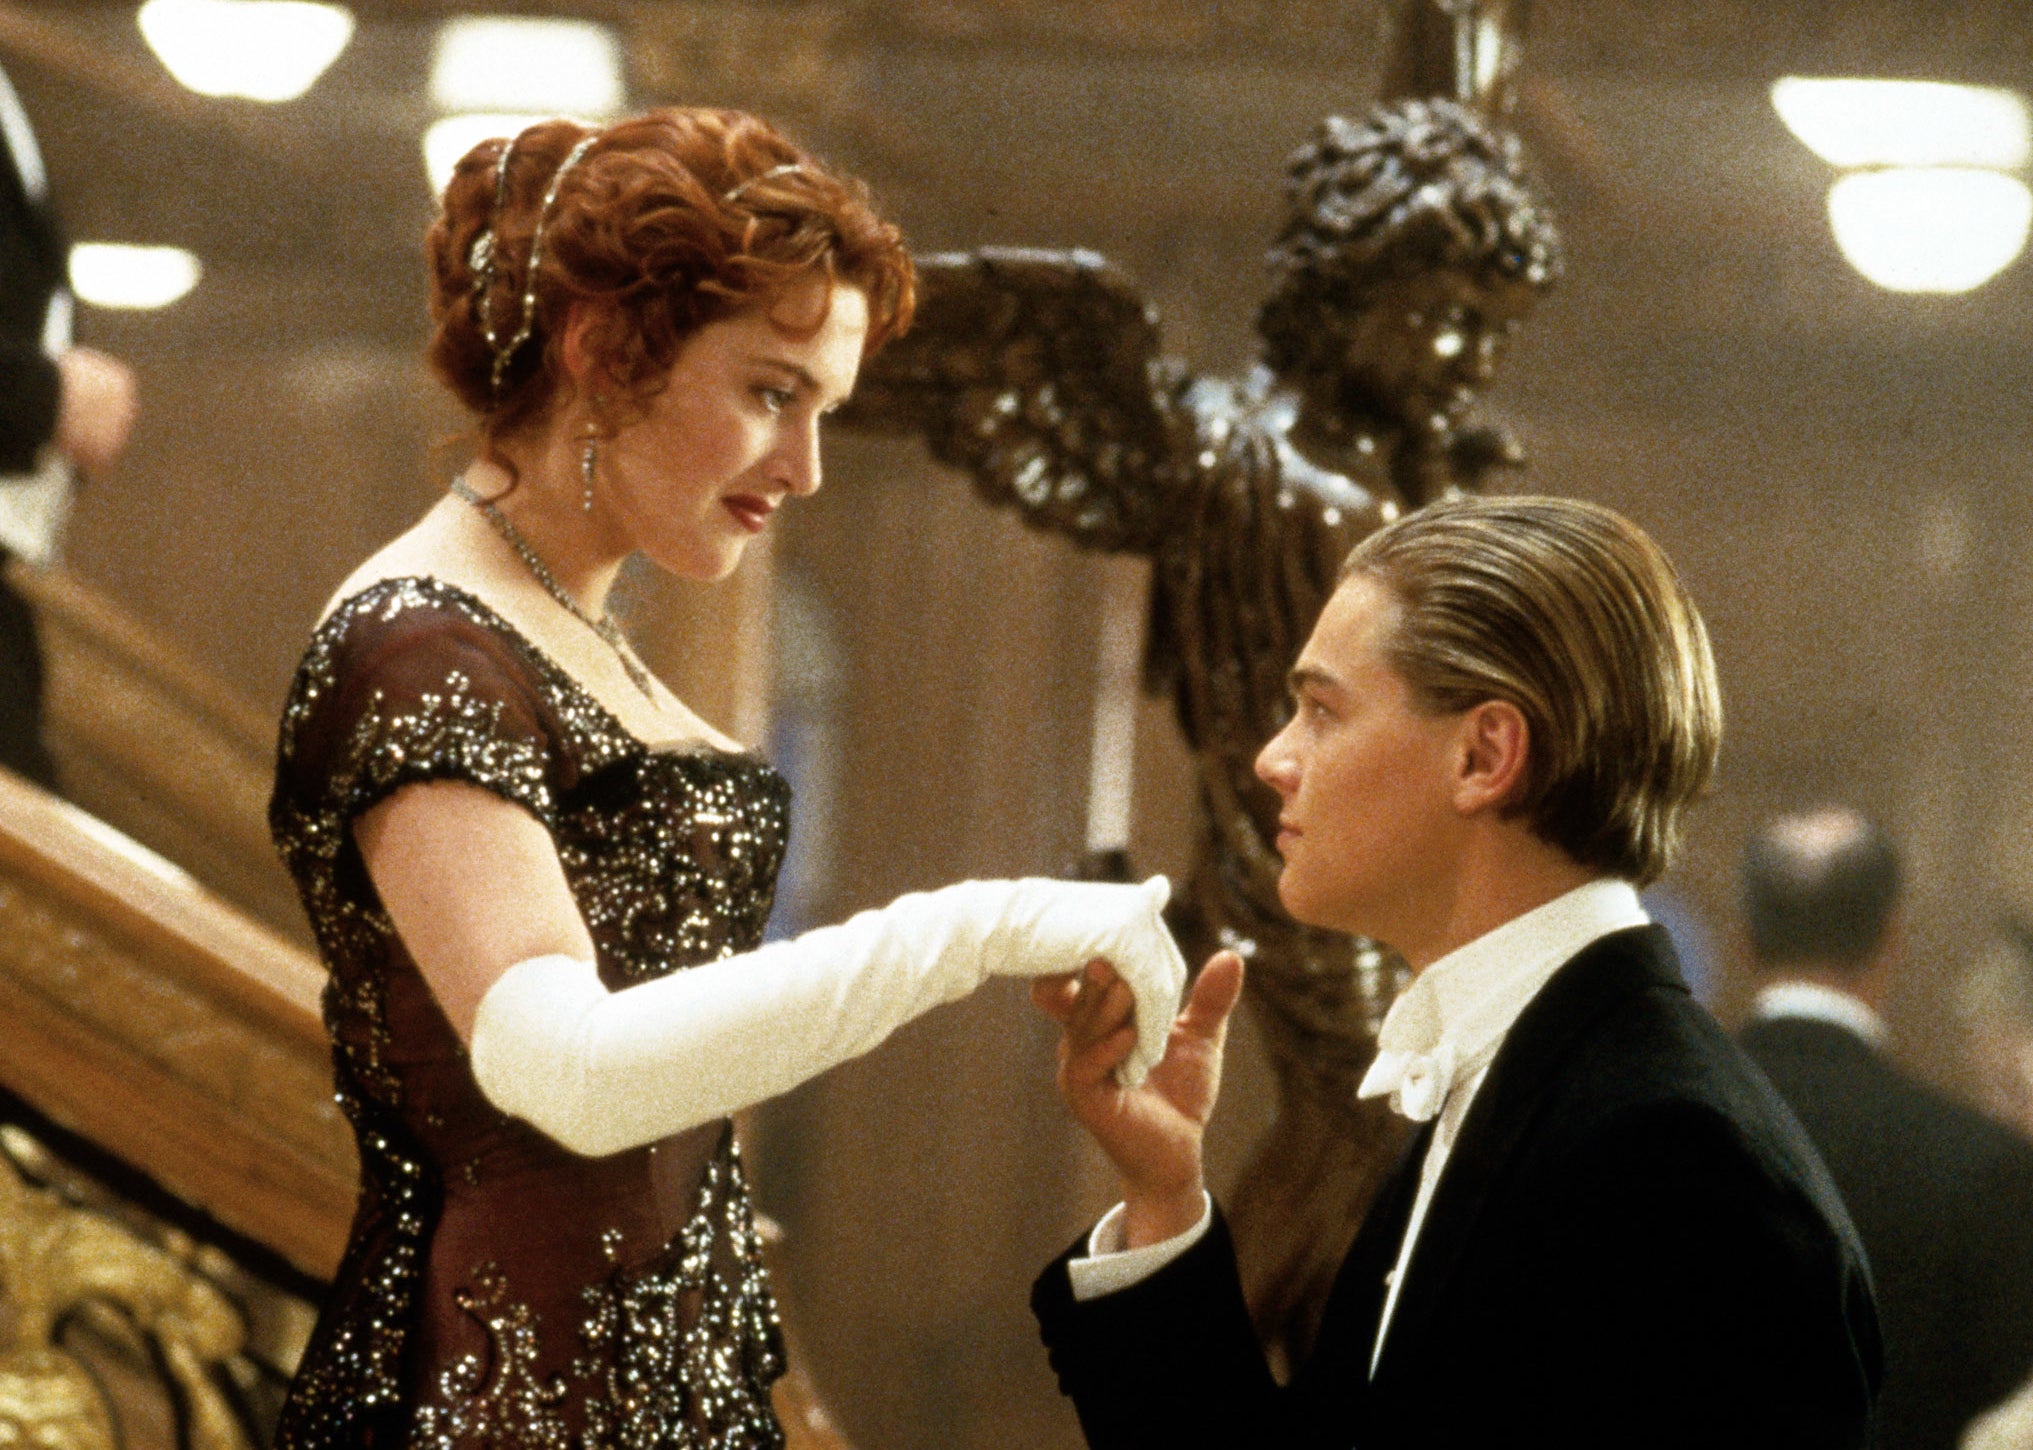 A man in a tuxedo kisses the hand of a woman in an embellished gown on the Titanic&#x27;s grand staircase